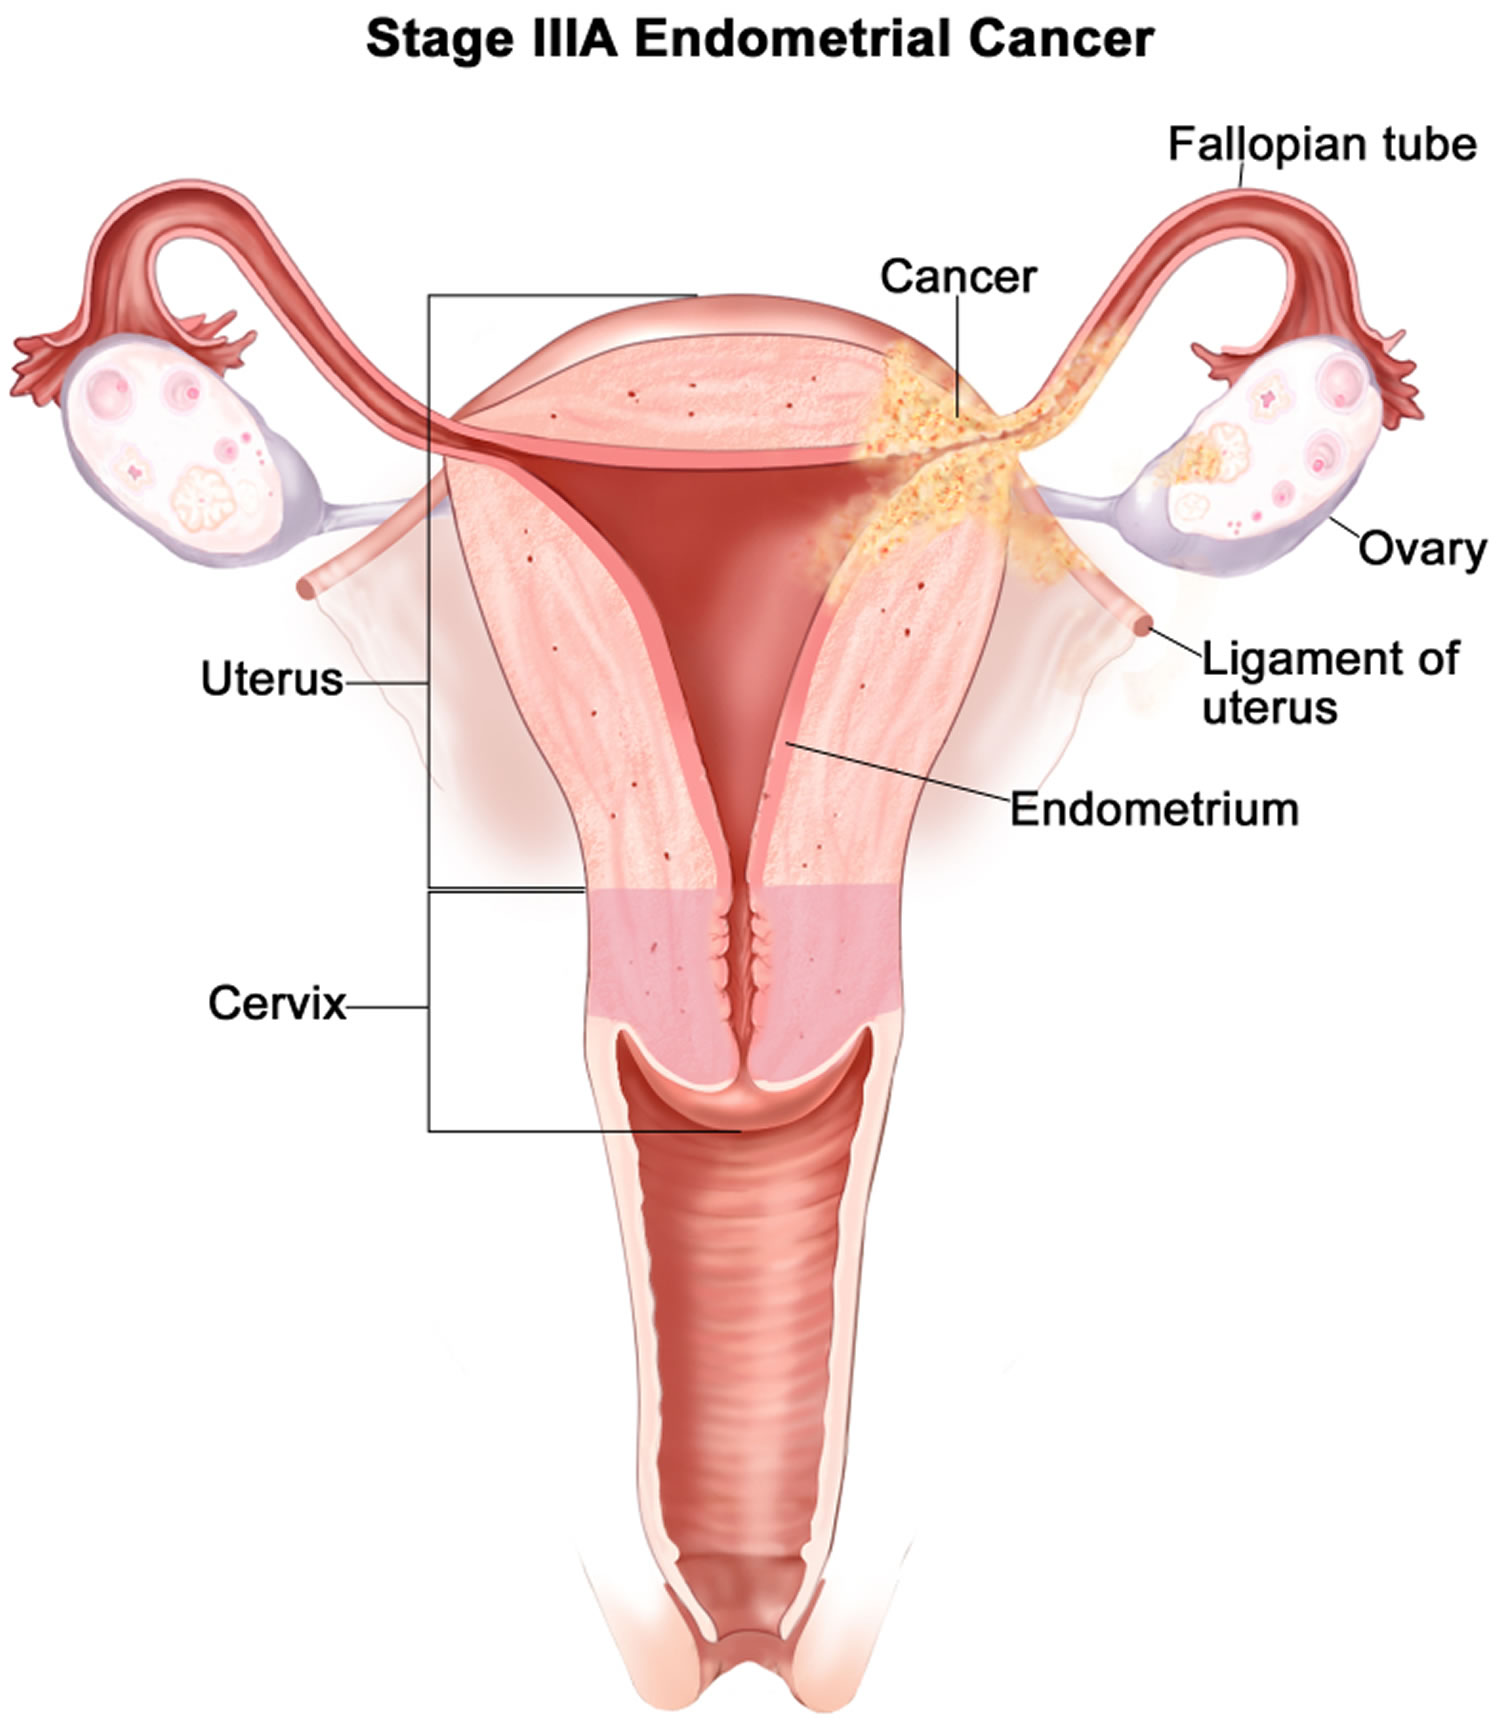 Stage 3A endometrial cancer